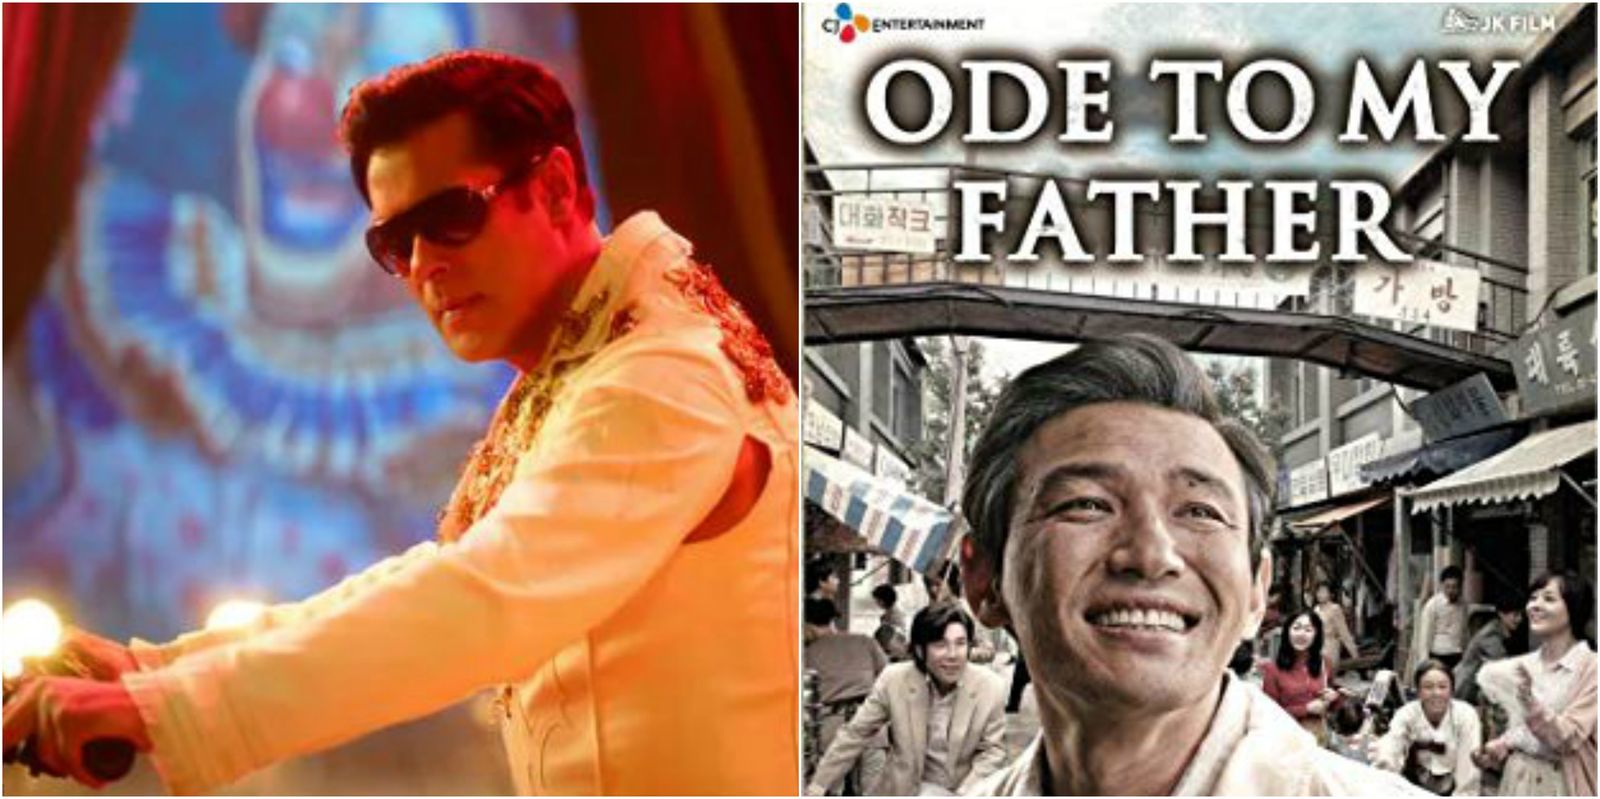 Here Is What The Story Of Bharat Could Be Based On The Korean Film Ode To My Father